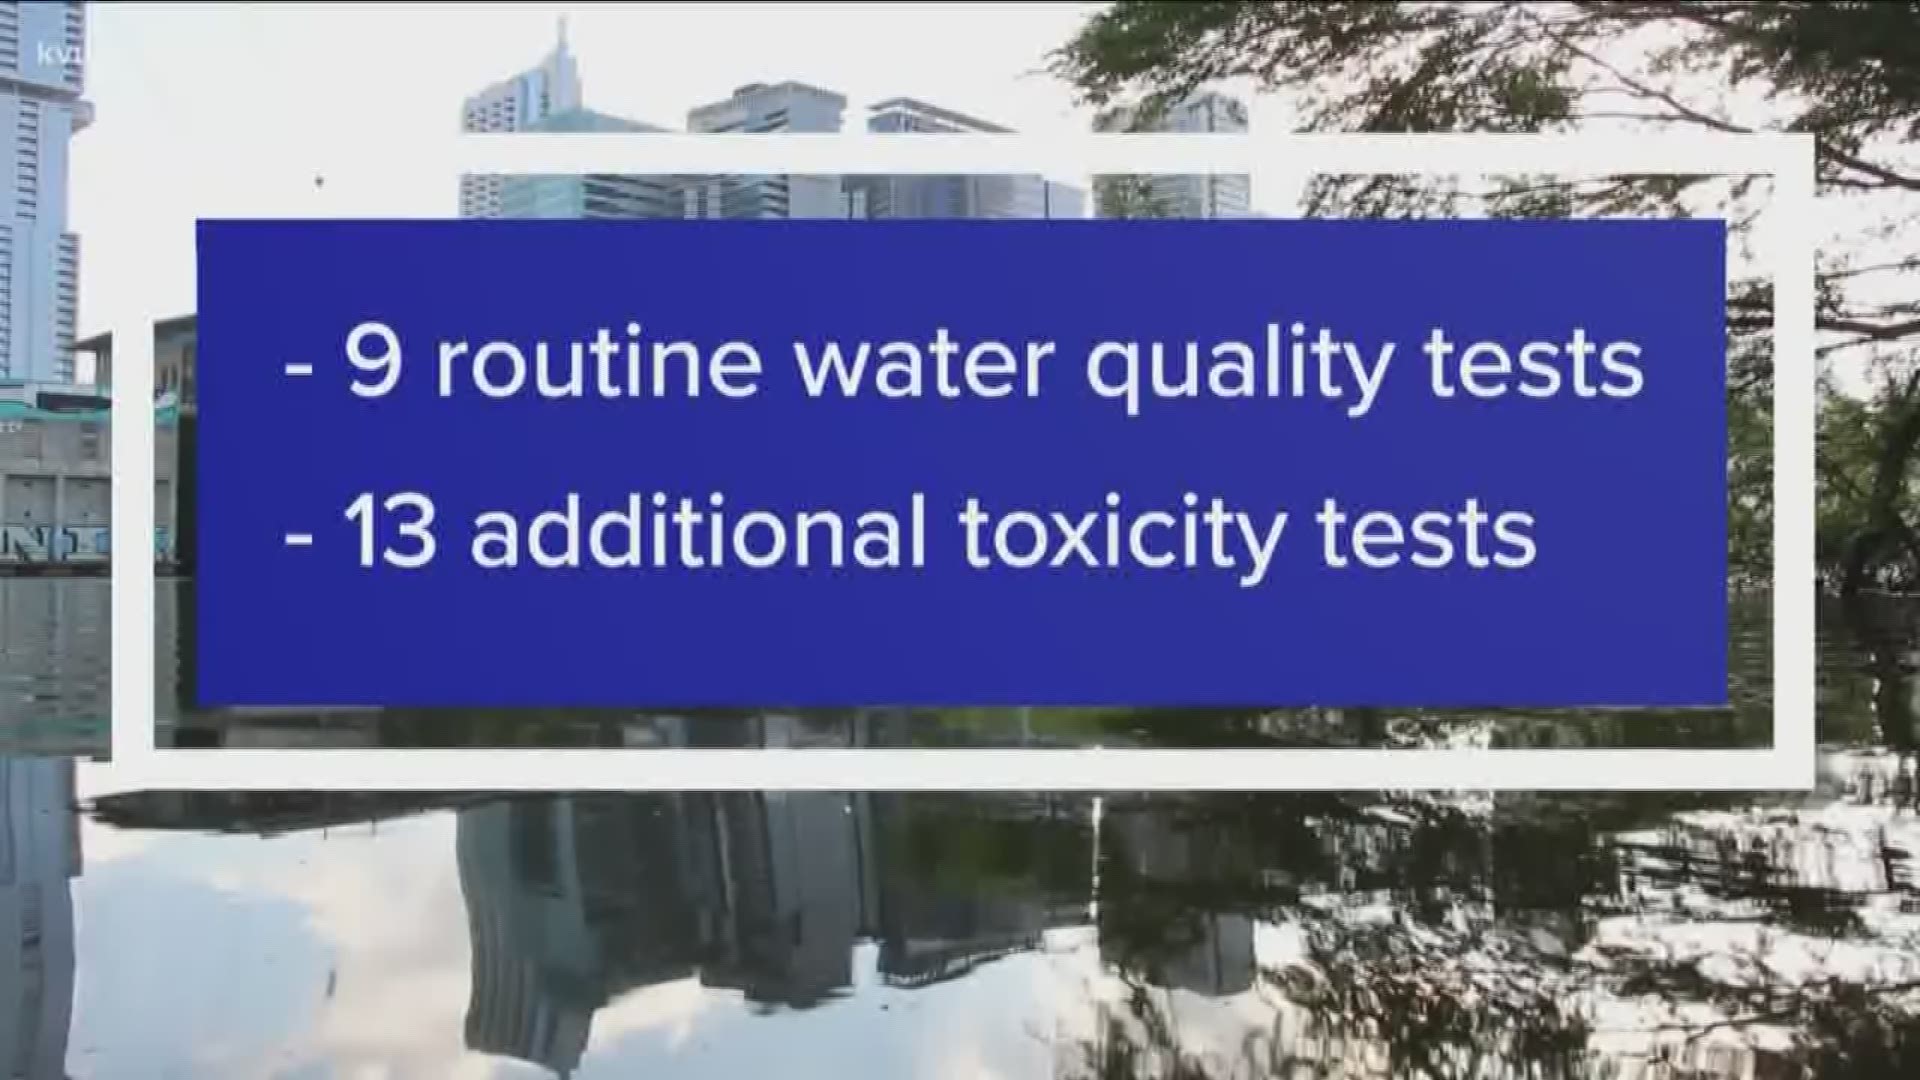 The City of Austin spent tens of thousands of dollars on extra tests because of toxic blue-green algae at the lake.